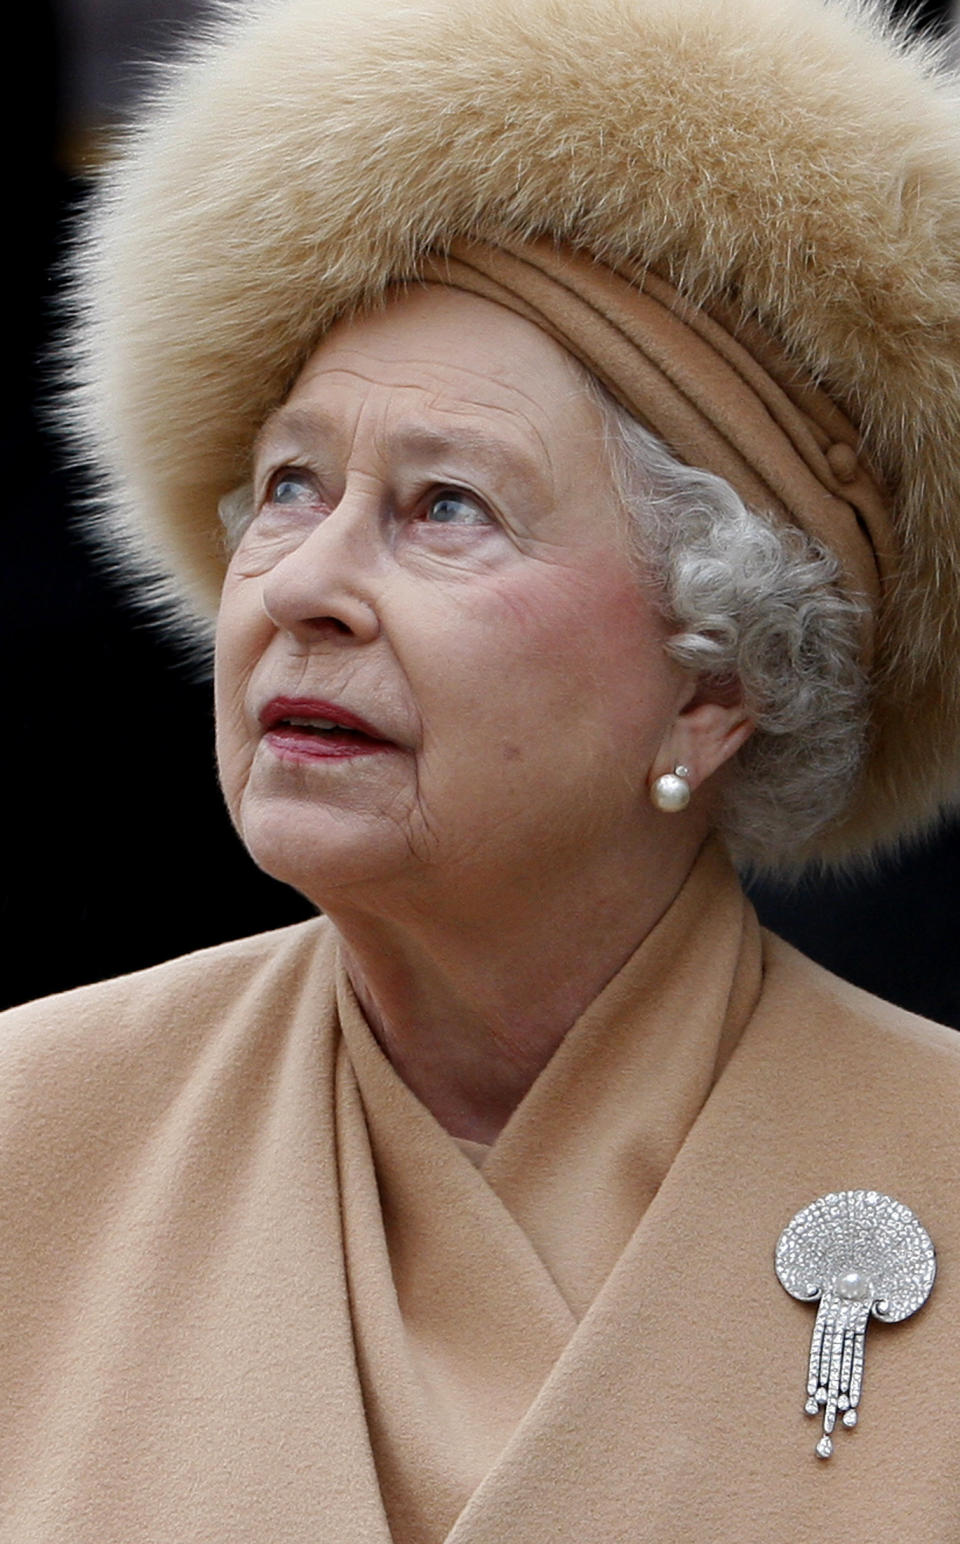 FILE - Britain's Queen Elizabeth II attends a ceremony to unveil a memorial to Queen Elizabeth, the Queen Mother, on the Mall in London, on Feb. 24, 2009. (AP Photo/Kirsty Wigglesworth, File)